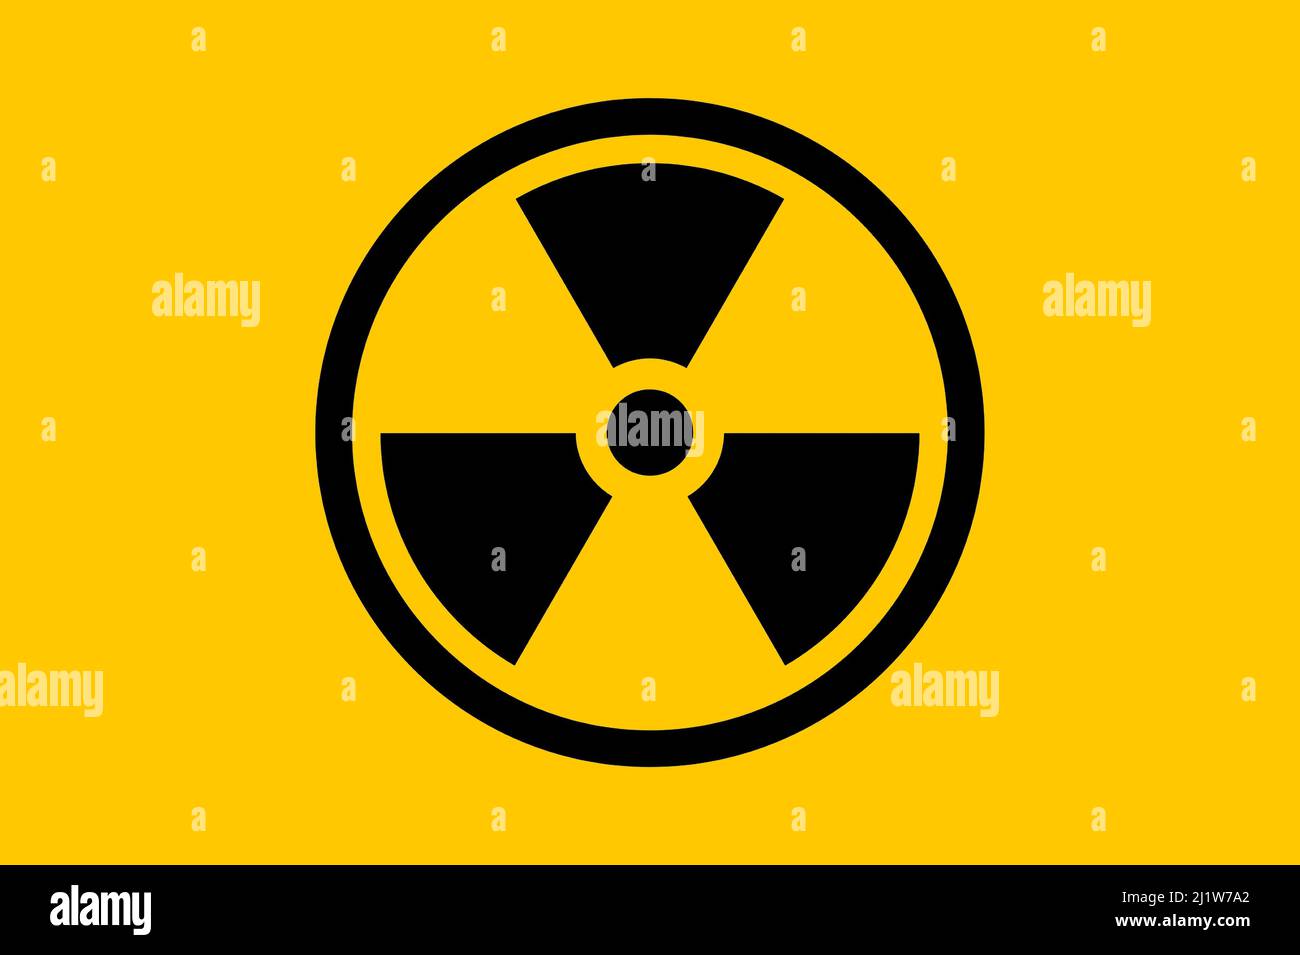 Nuclear weapons. Nuclear weapons logo design. Smooth bottom for easy selection. Horizontal design. Stock Photo